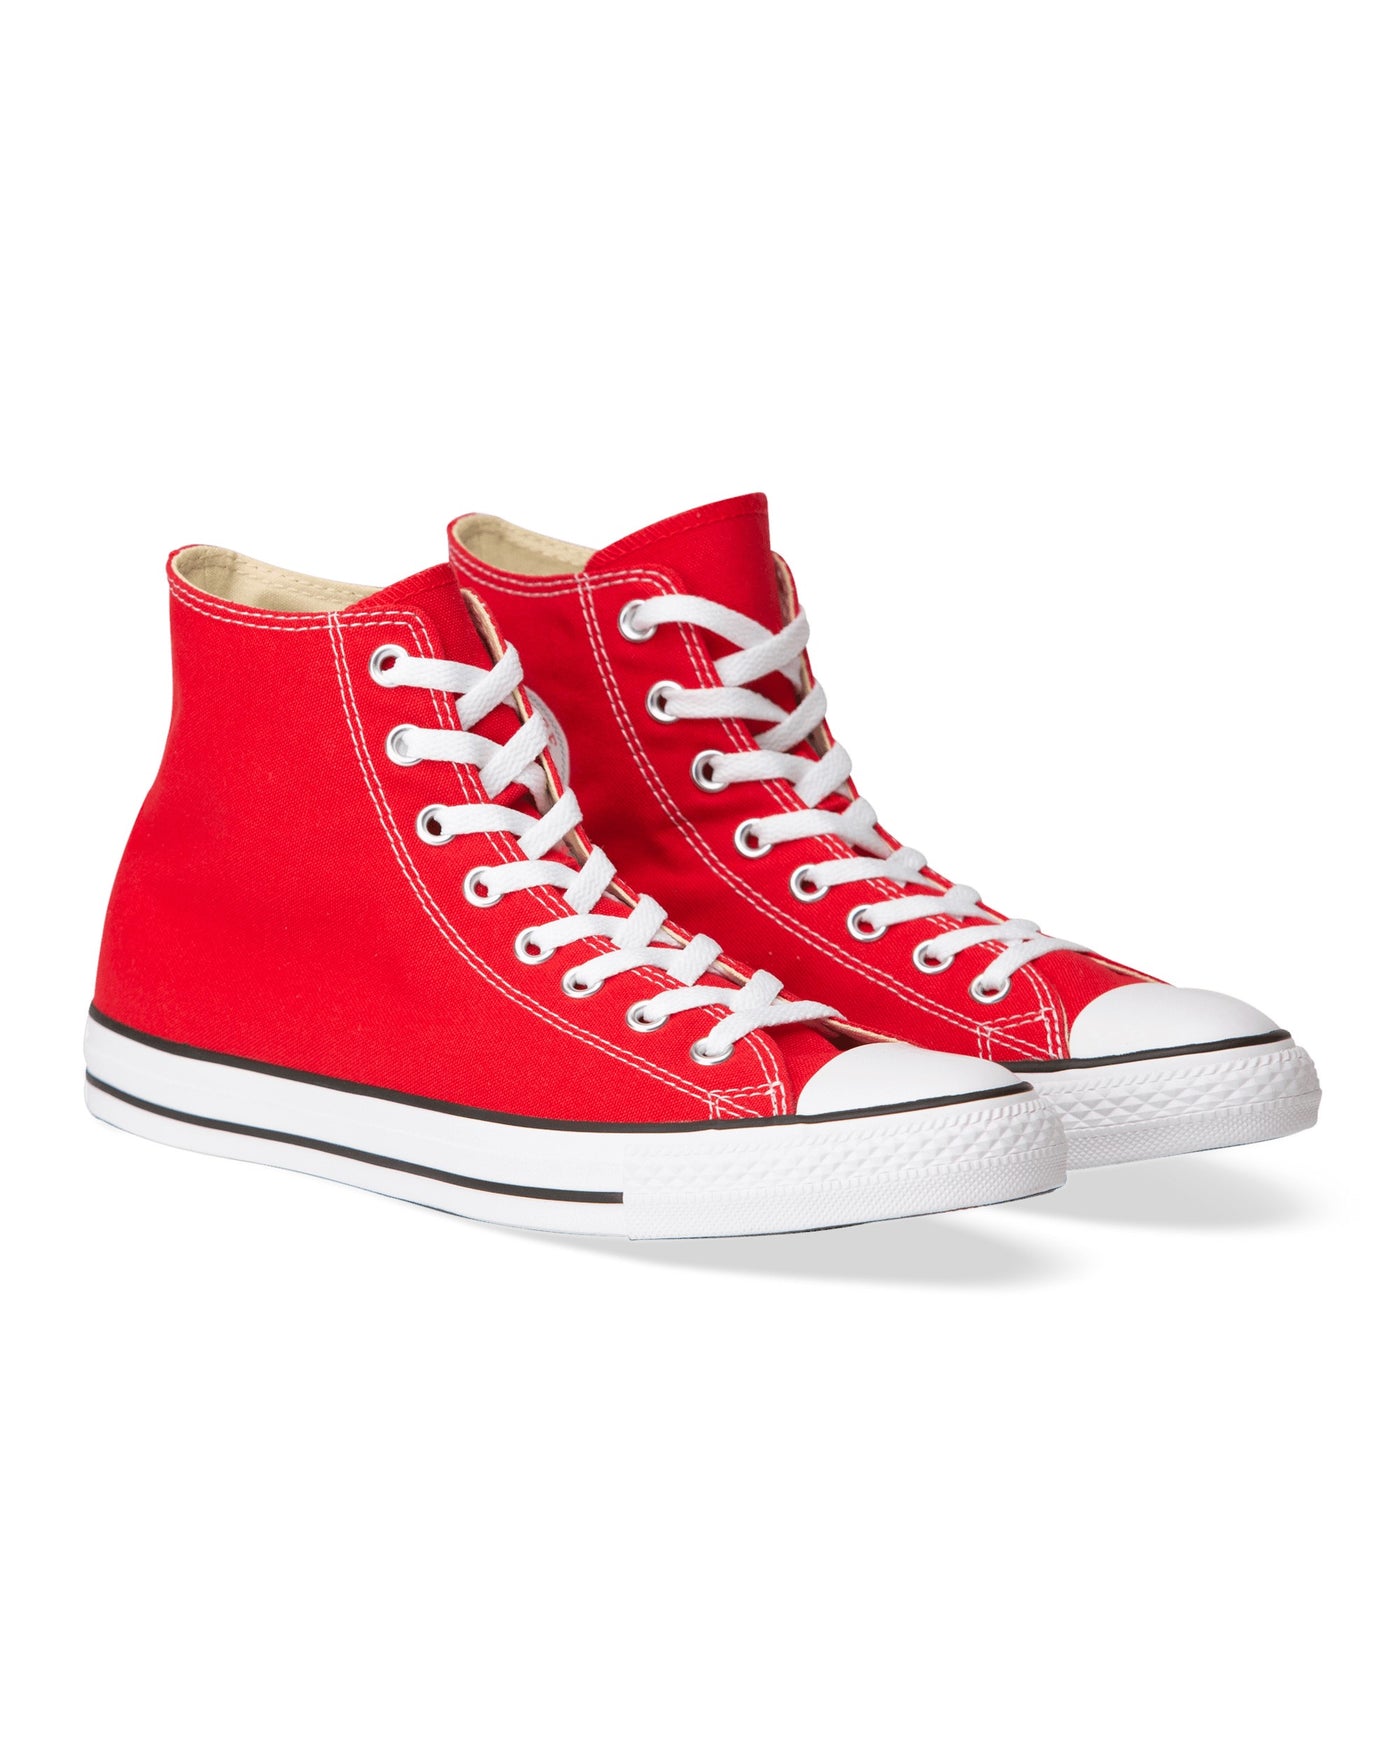 Converse Chuck Taylor High Top Red